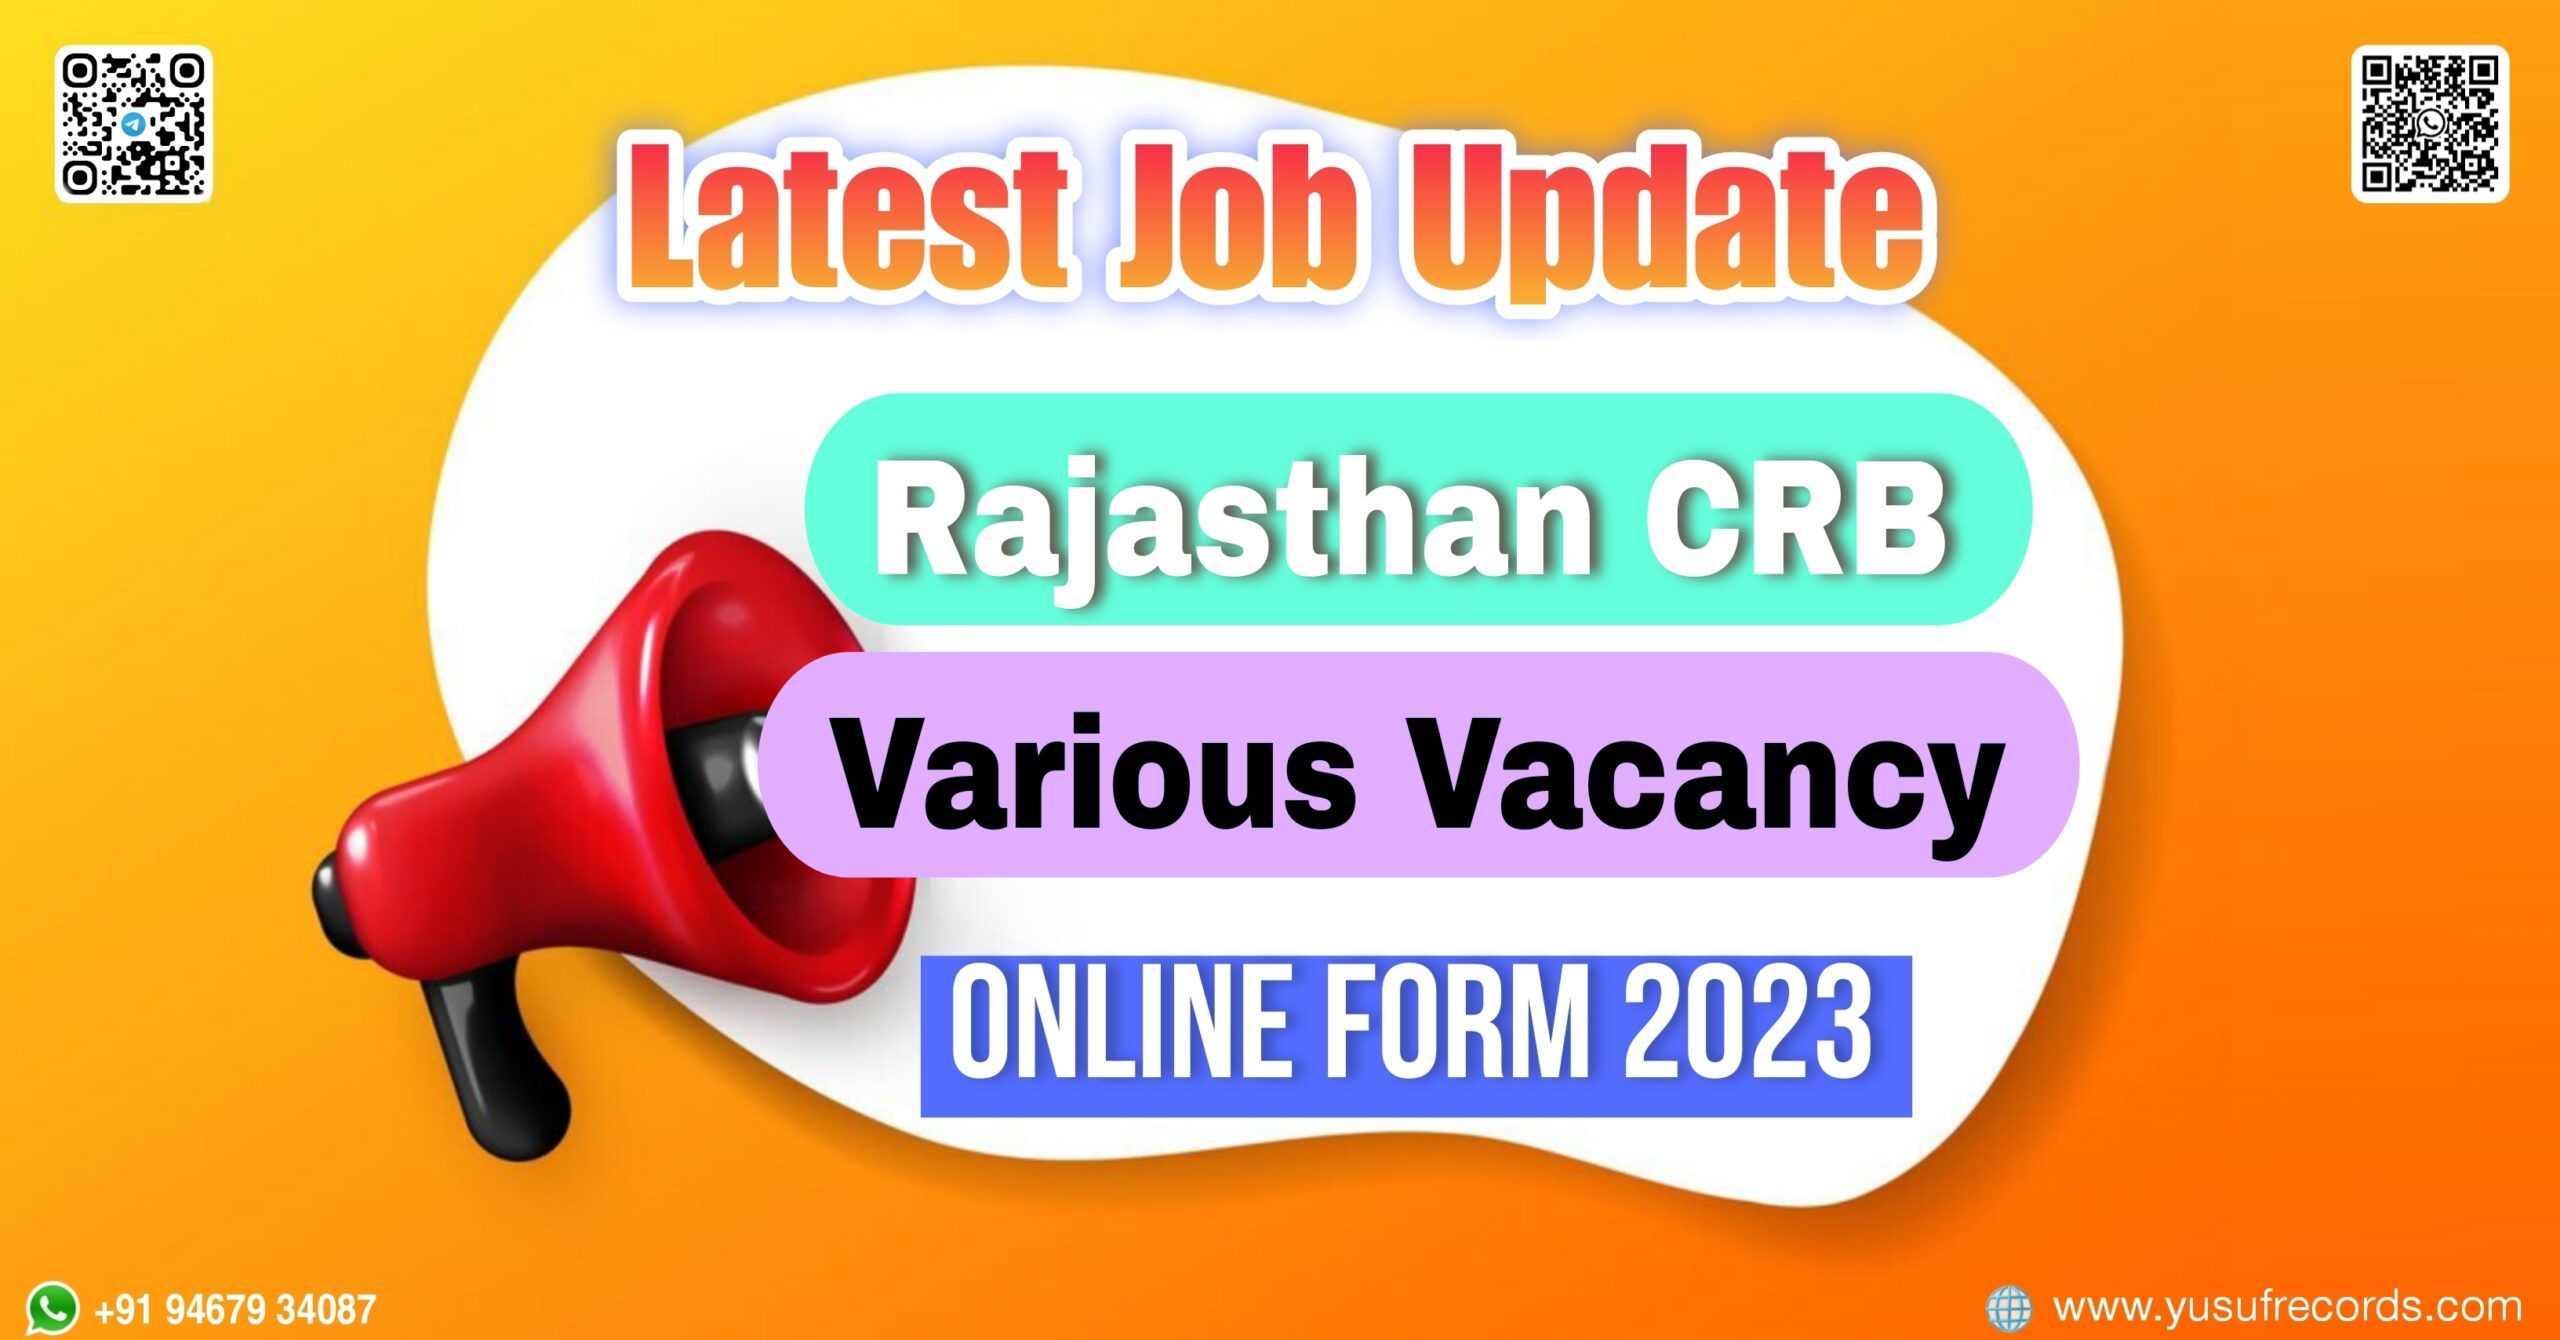 Rajasthan CRB Various Vacancy Online Form yusufrecords latest job updates